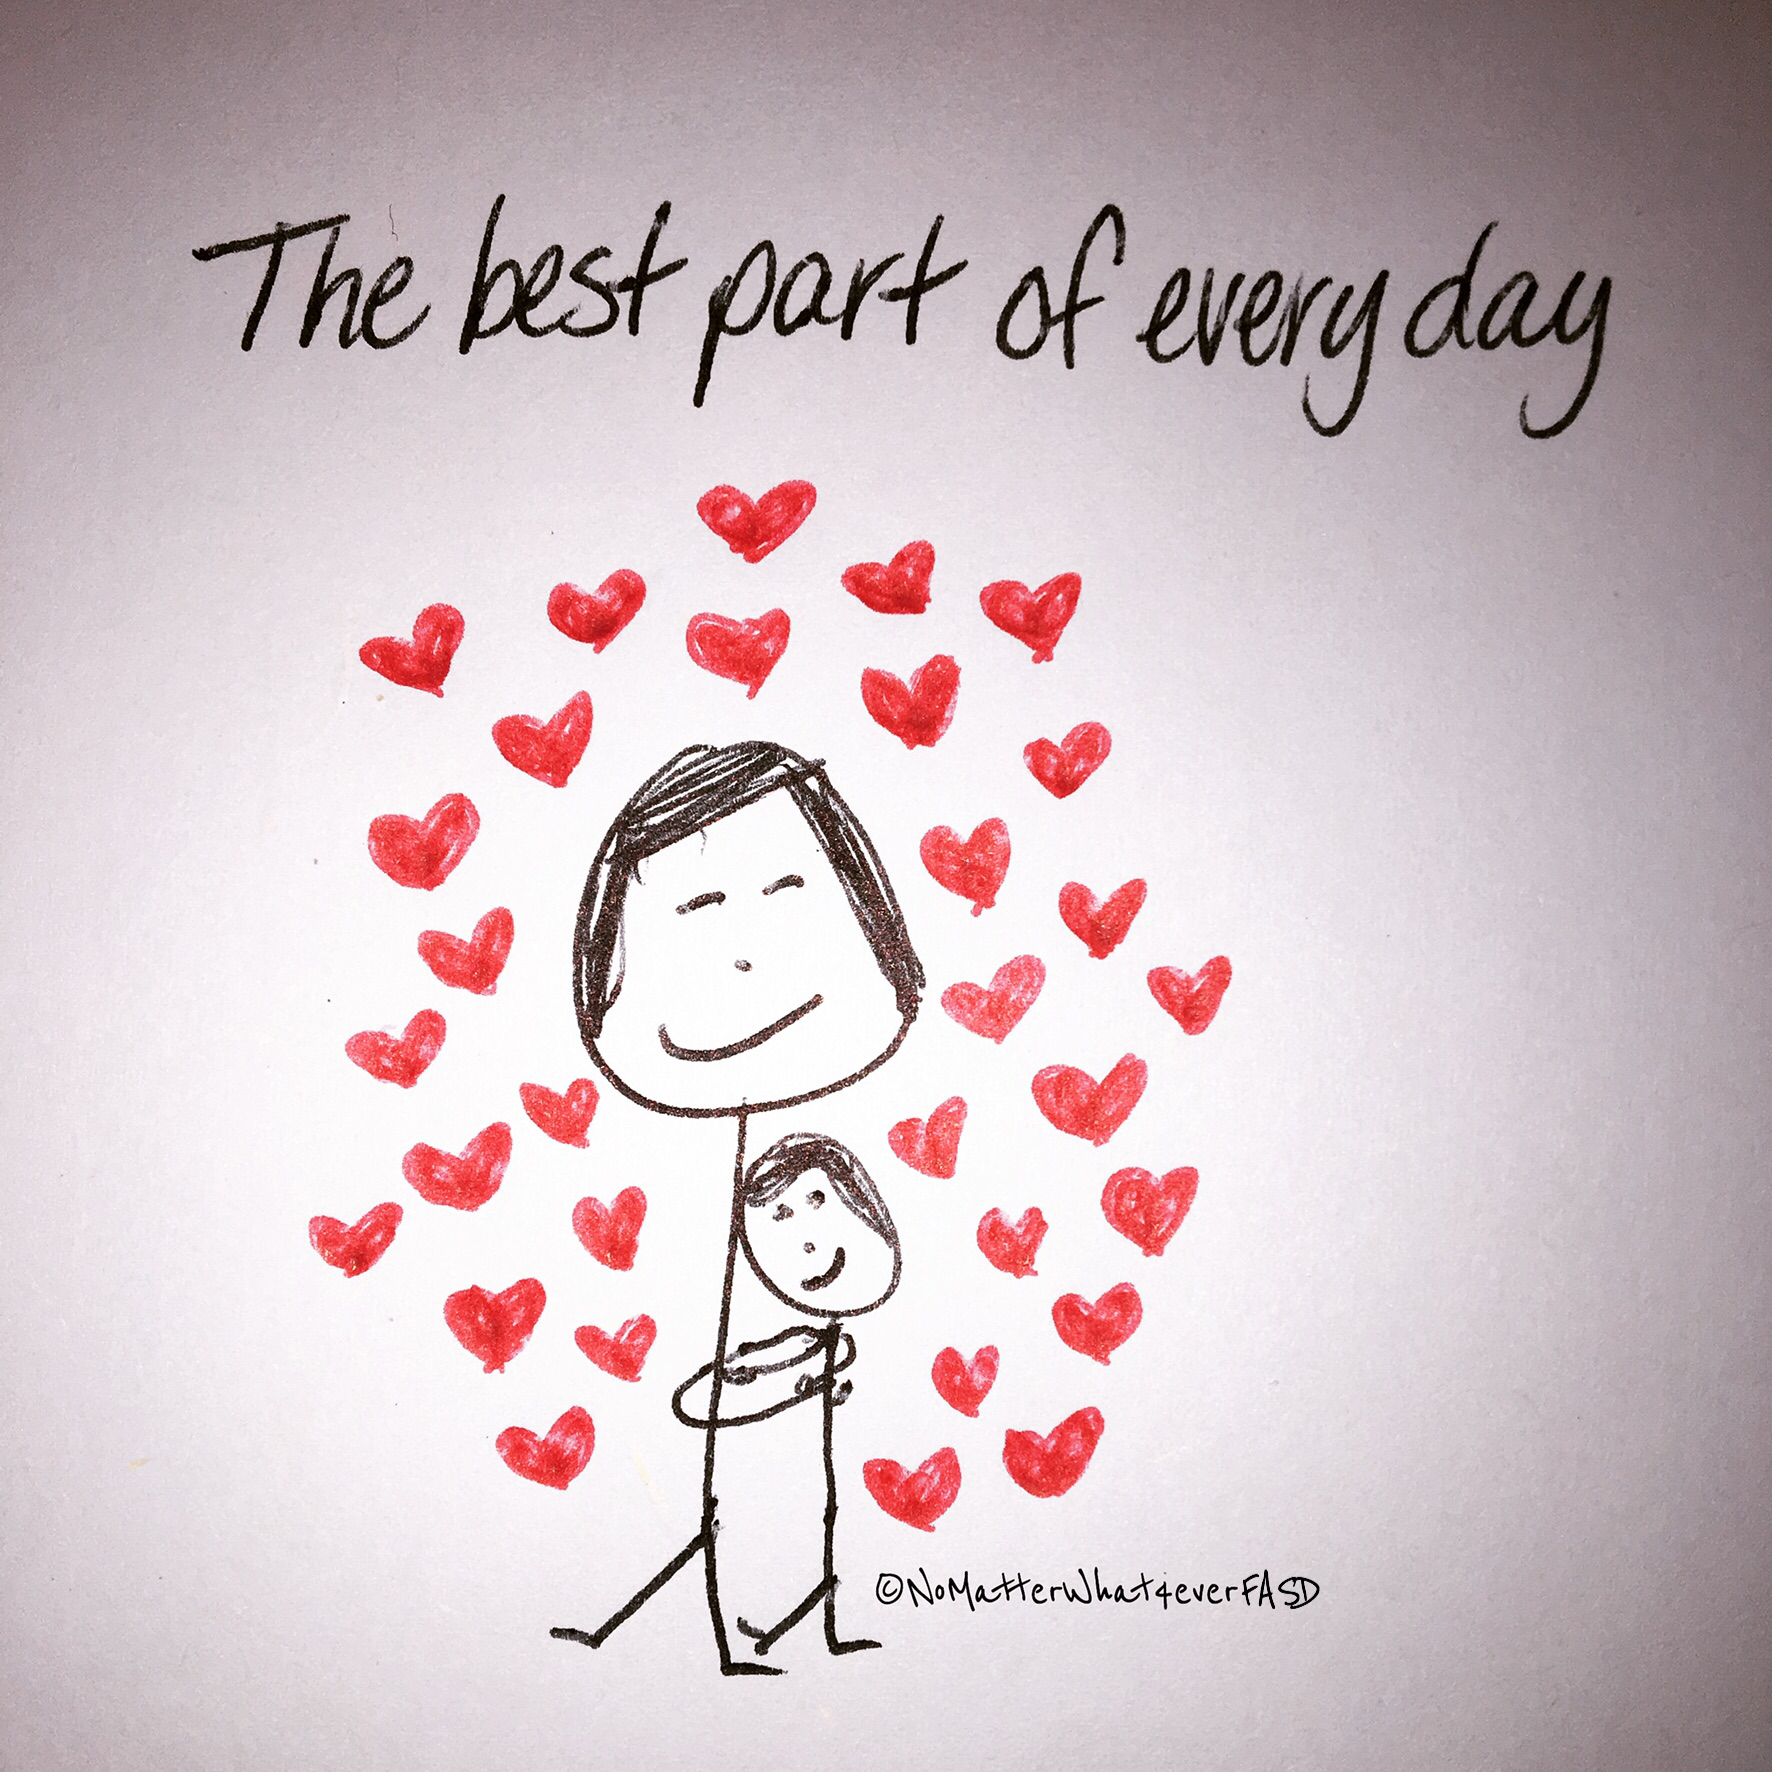 Drawn image of an adult and child embraced surrounded by red hearts and the words The best part of everyday.